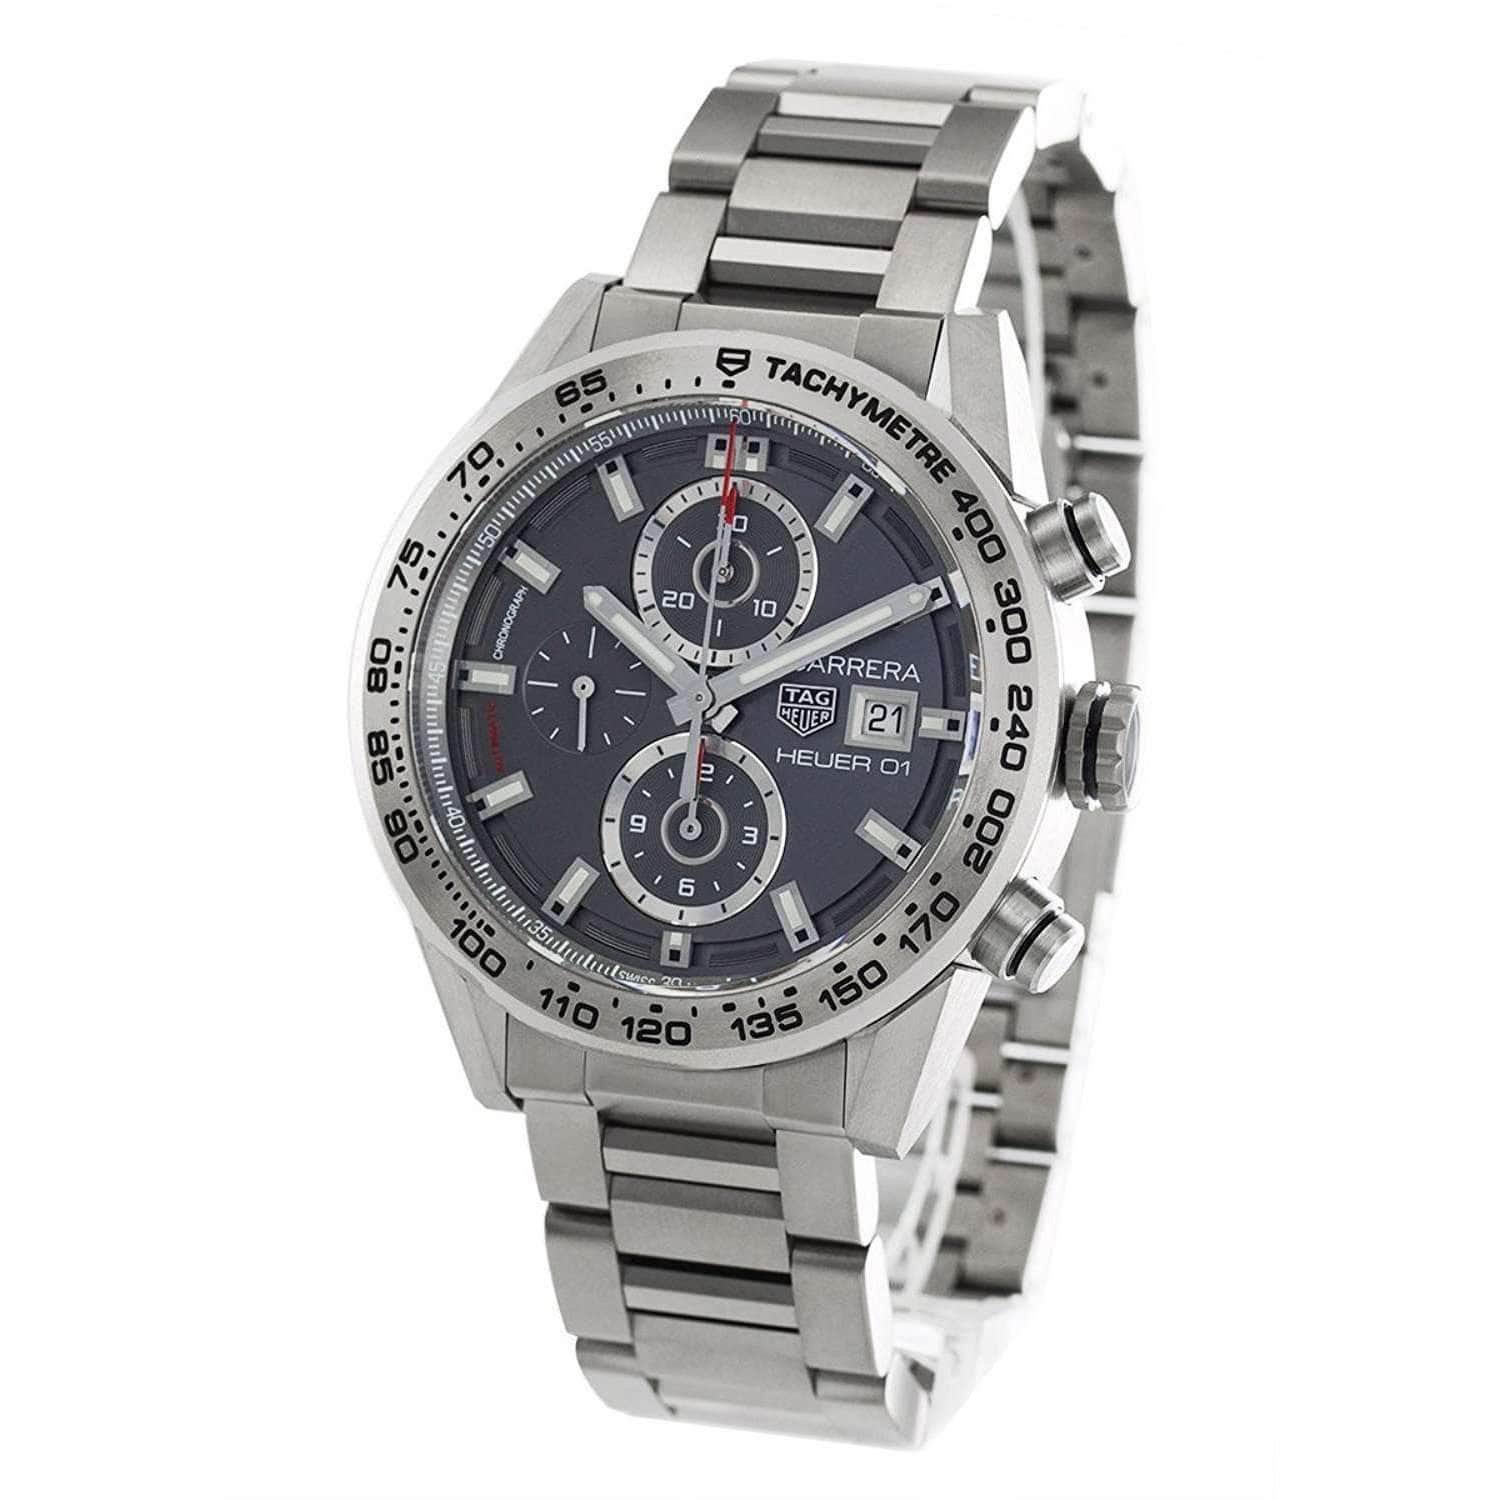 TAG HEUER CARRERA AUTOMATIC CHRONOGRAPH MEN WATCH CAR208Z.BF0719 - ROOK JAPAN